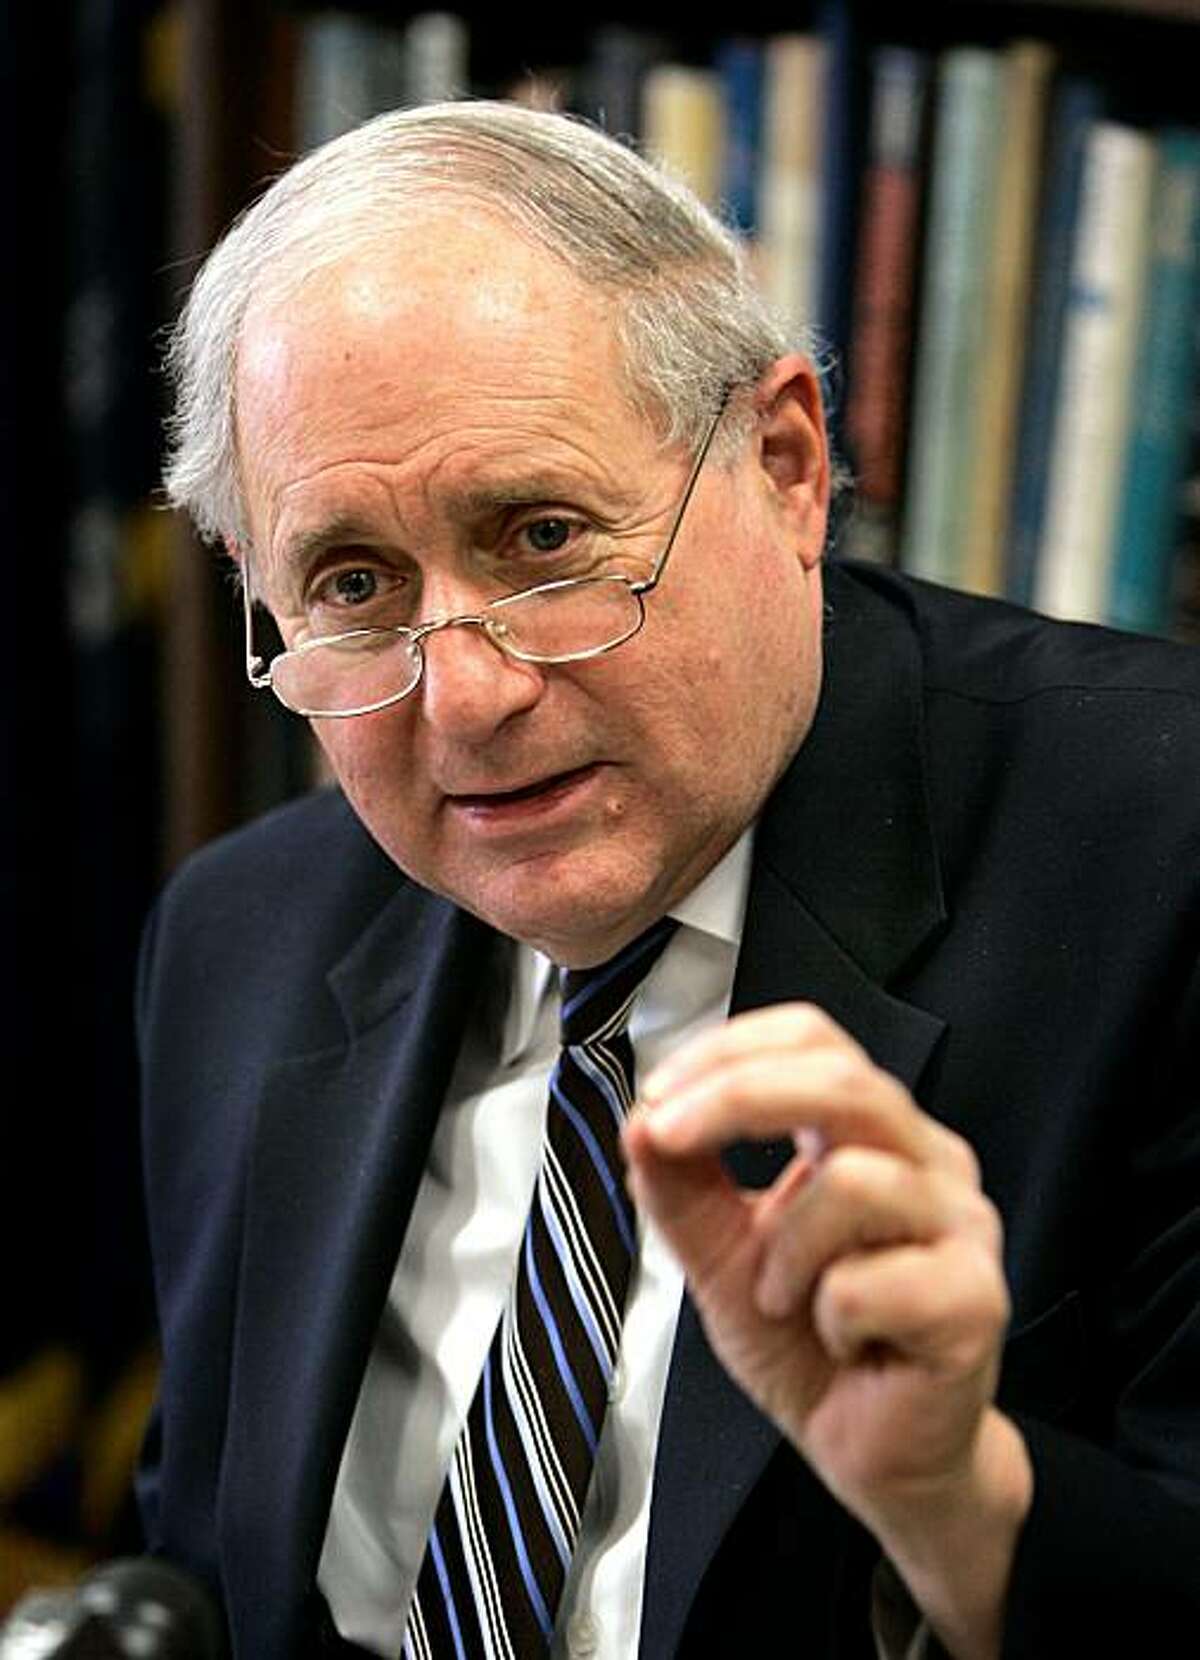 U.S. Sen. Carl Levin addresses the media in Detroit, Monday, Dec. 15, 2008. The Congressman says he expects President Bush's solution to help the Detroit automakers will follow the previous deal Bush reached with congressional leaders. The deal approved by the House provided loans for Chrysler LLC and General Motors Corp. to help them survive until March 31, but it was blocked by some Republican senators. The Michigan Democrat says the Treasury secretary likely would become the "car czar" and oversee restructuring the automakers. (AP Photo)